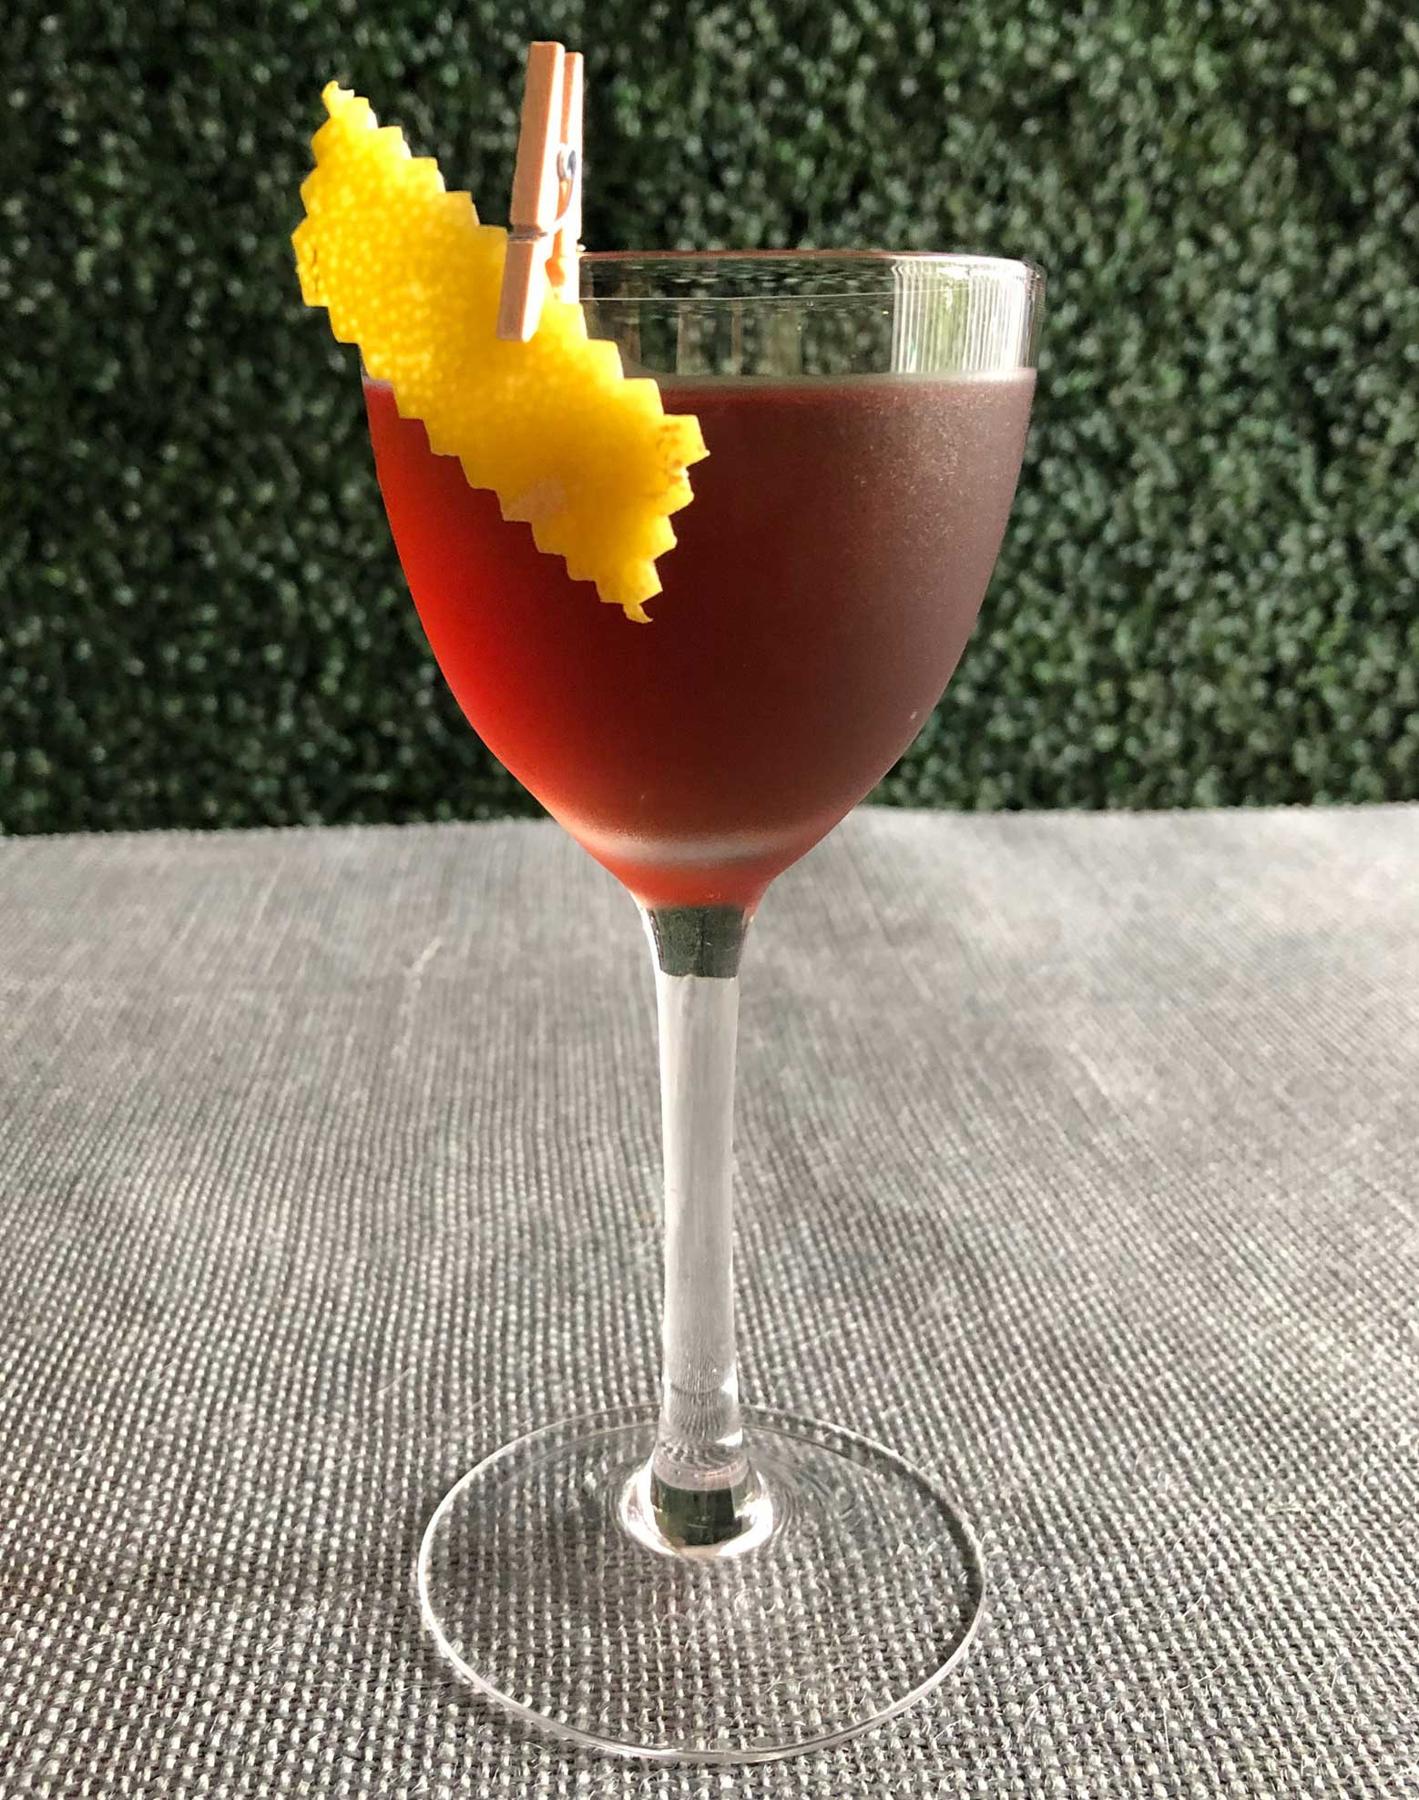 An example of the Purple Globe, the mixed drink (drink) featuring Hayman’s London Dry Gin, Averell Damson Plum Gin Liqueur, Pasubio Vino Amaro, and lemon twist; photo by Lee Edwards